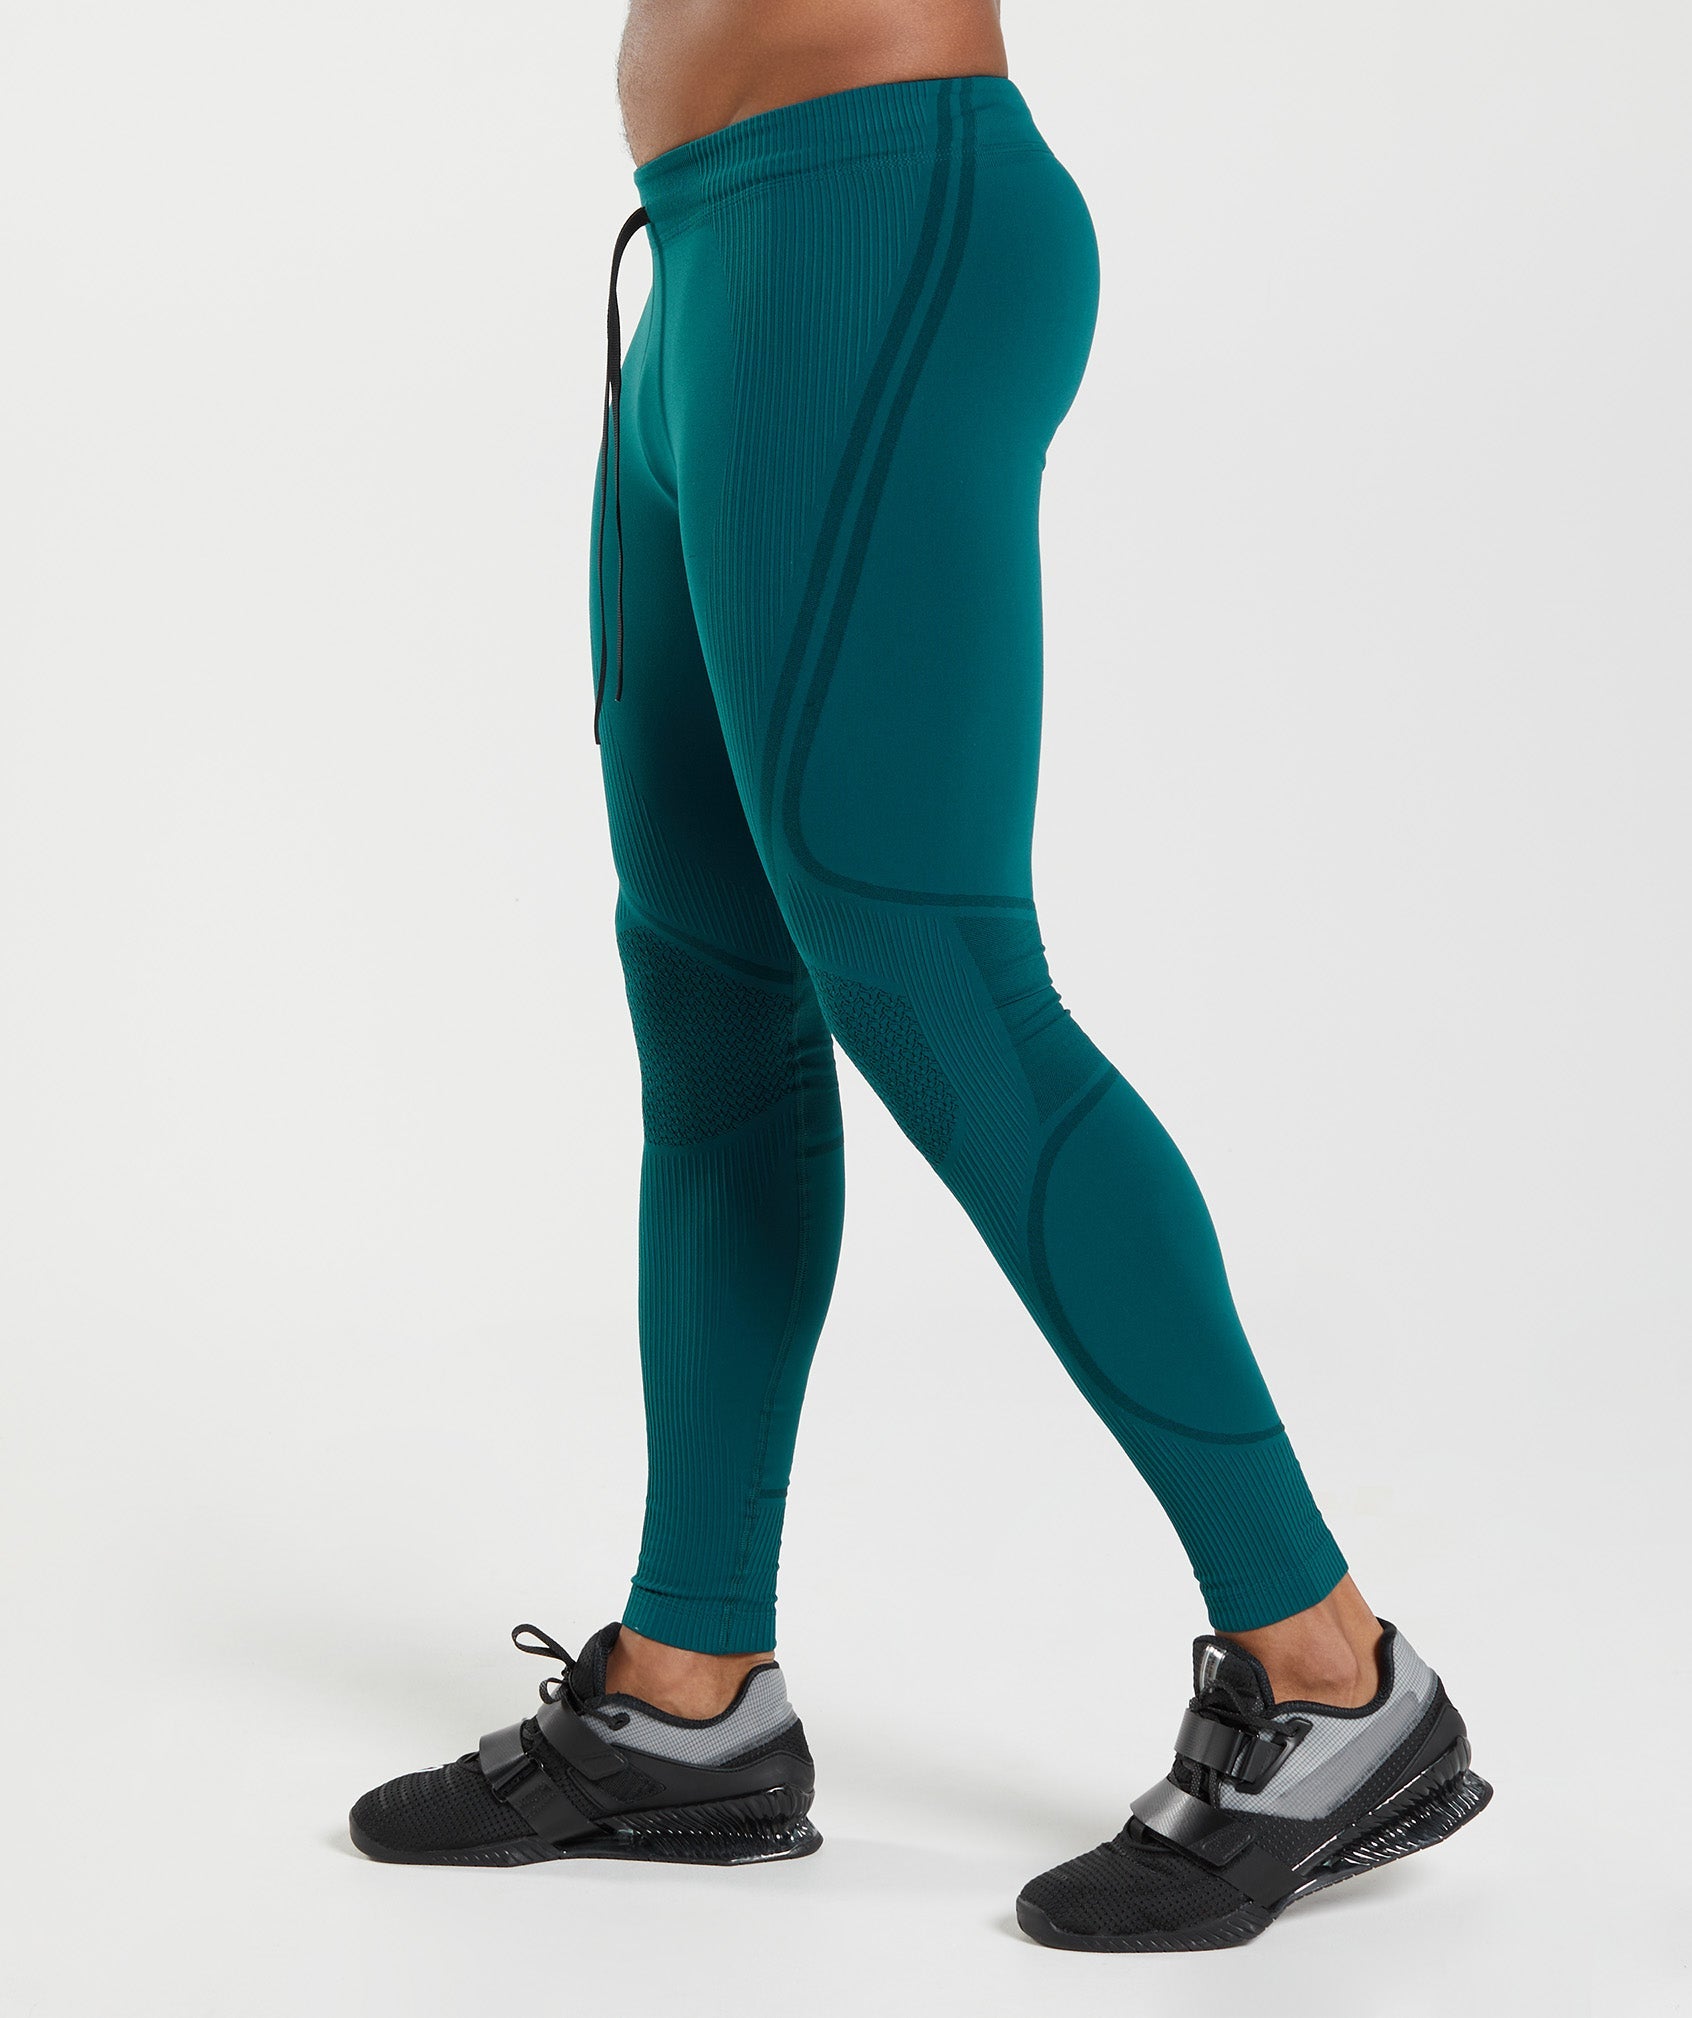 315 Seamless Tights in Winter Teal/Black - view 3